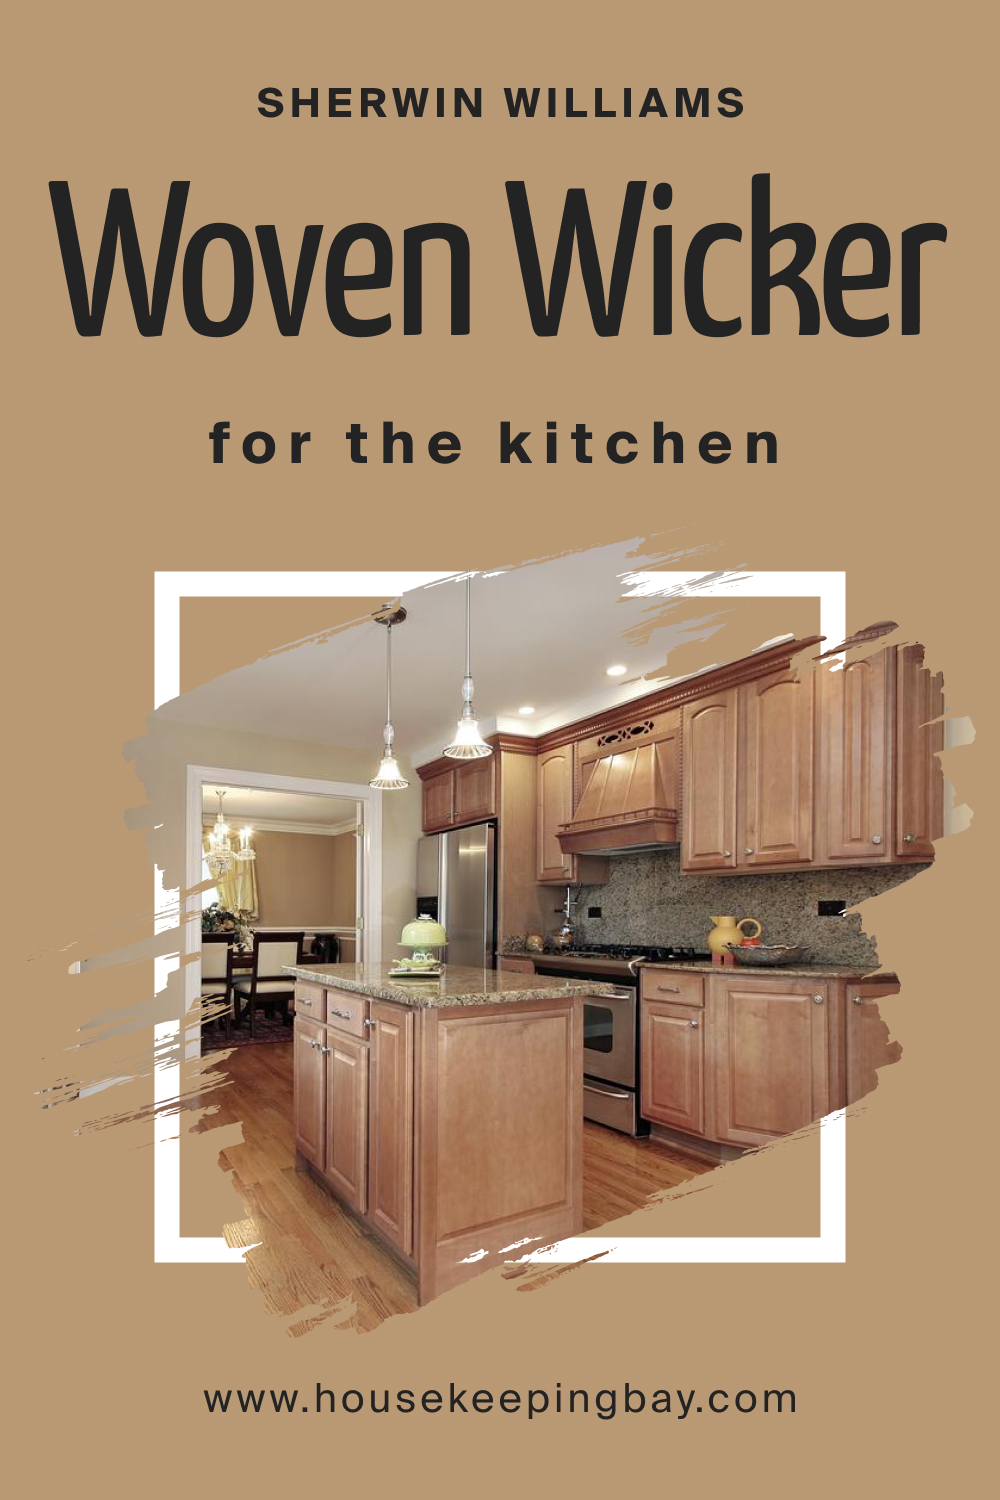 Sherwin Williams. SW 9104 Woven Wicker For the Kitchens